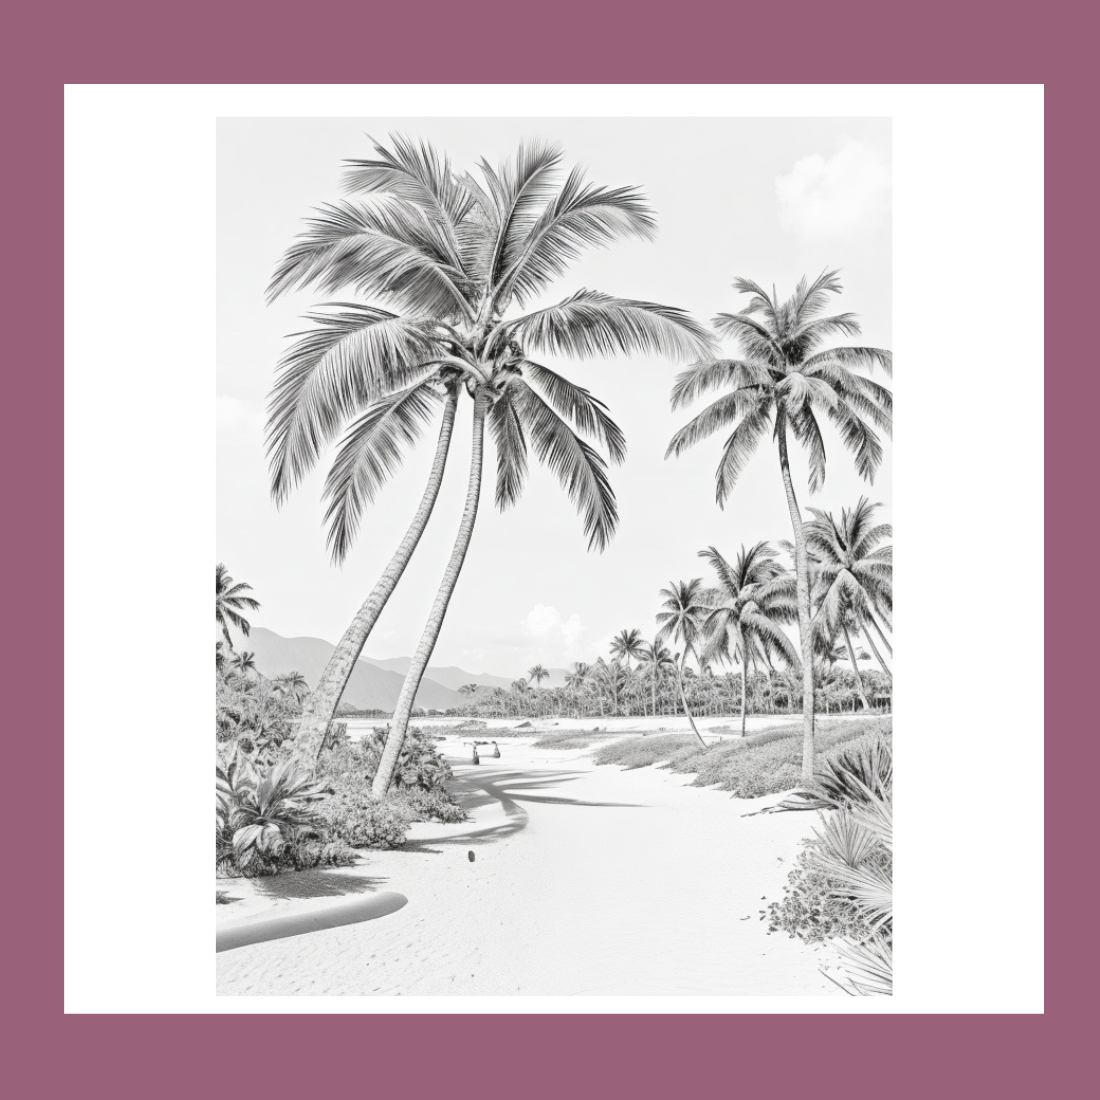 A tropical island with palm trees and a beach coloring page bundle preview image.